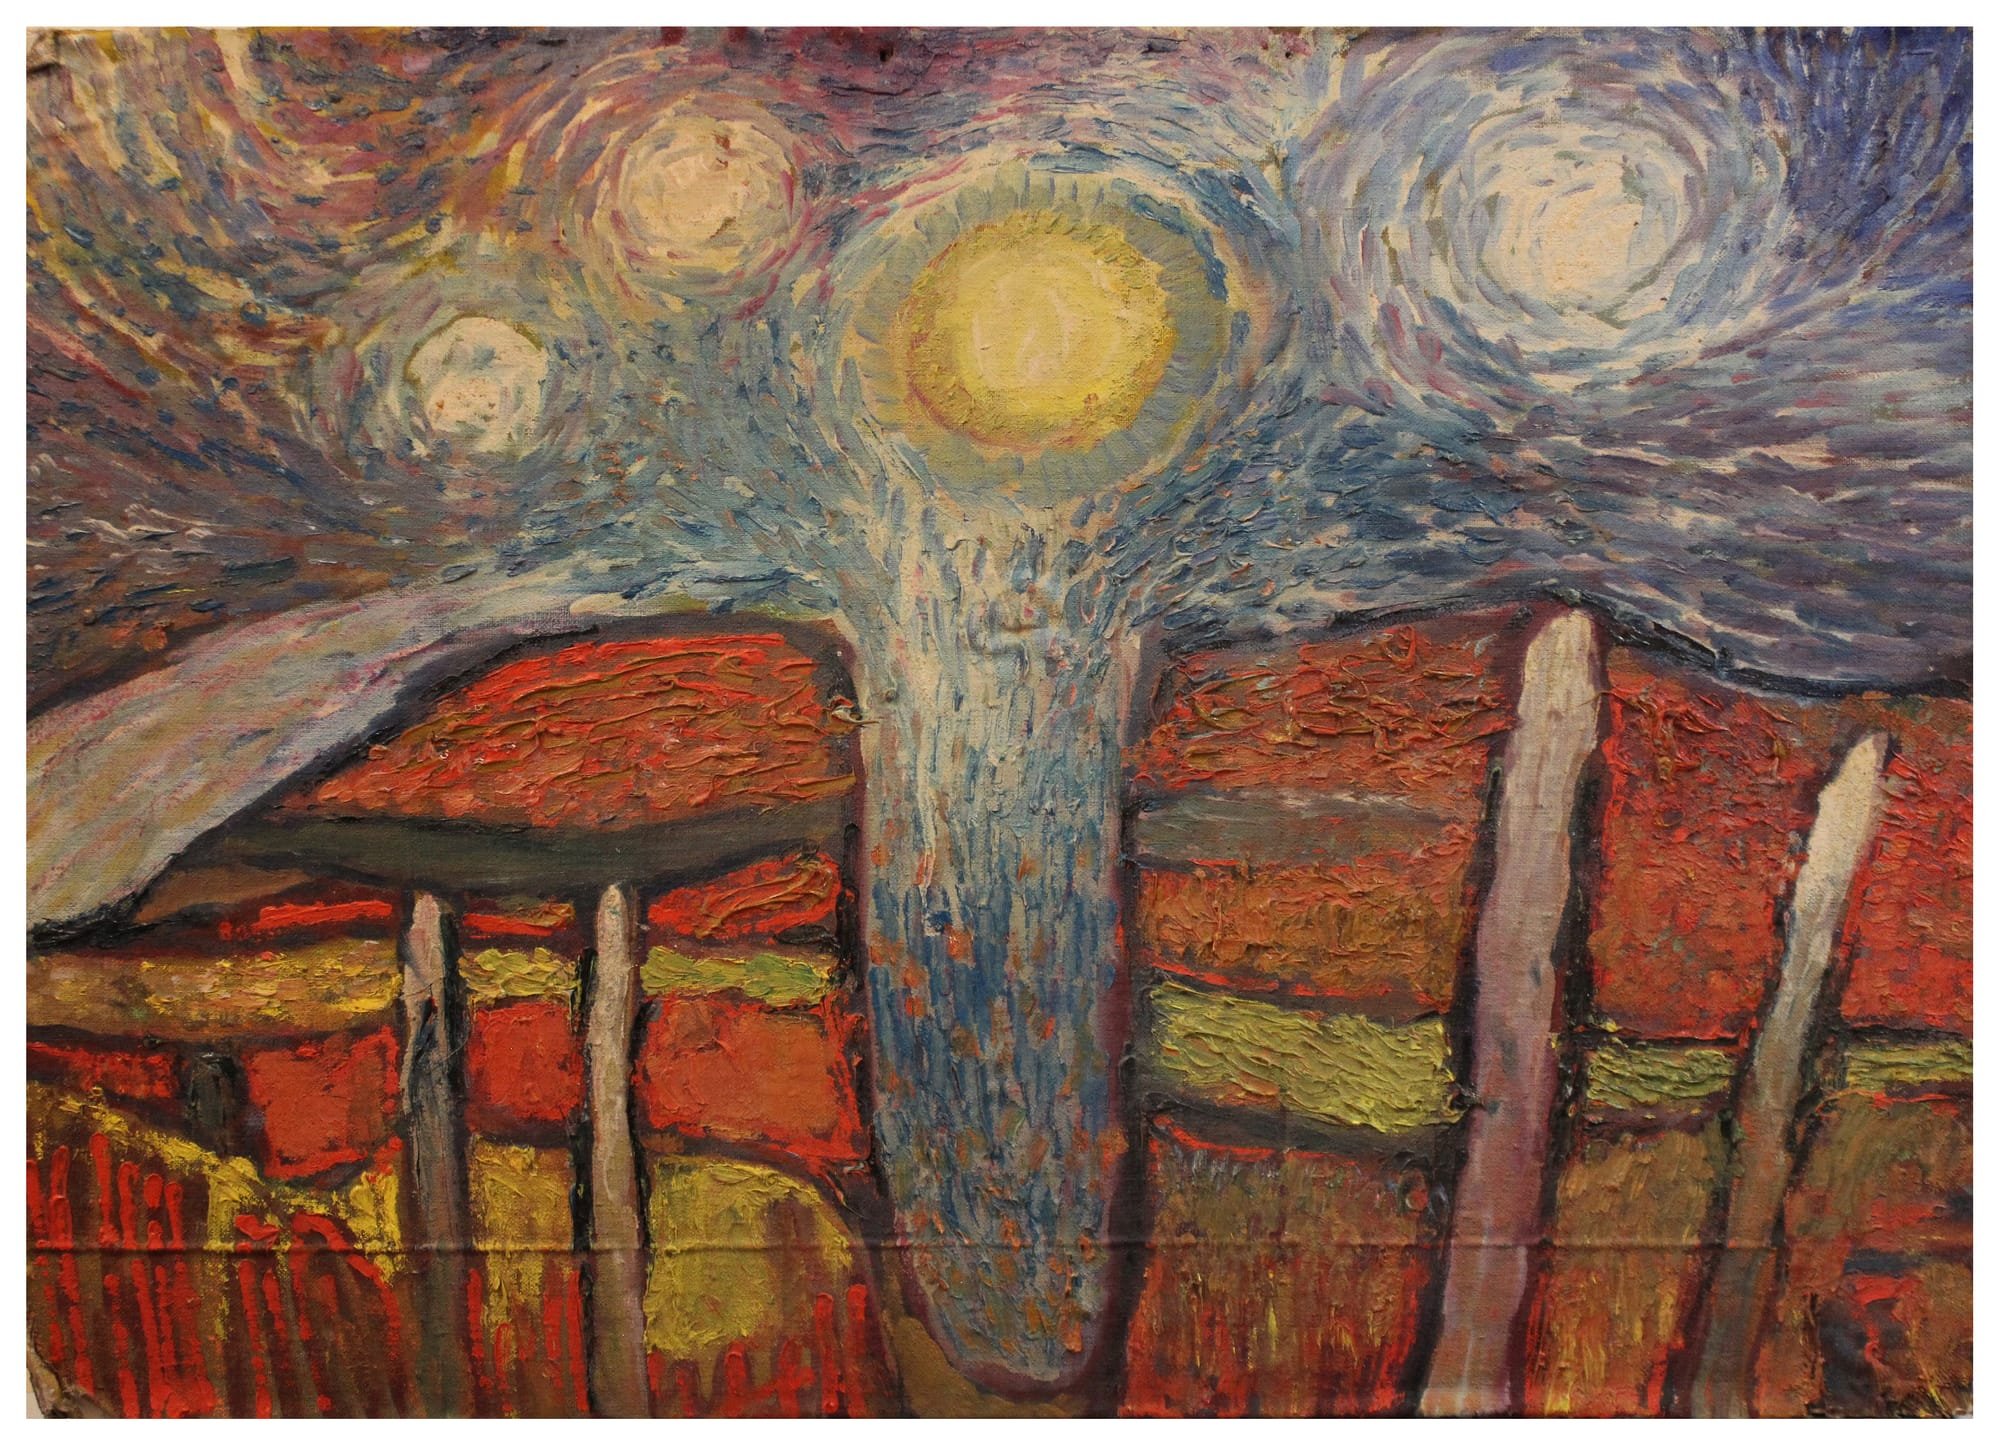 Apparition over the mountain, 2003